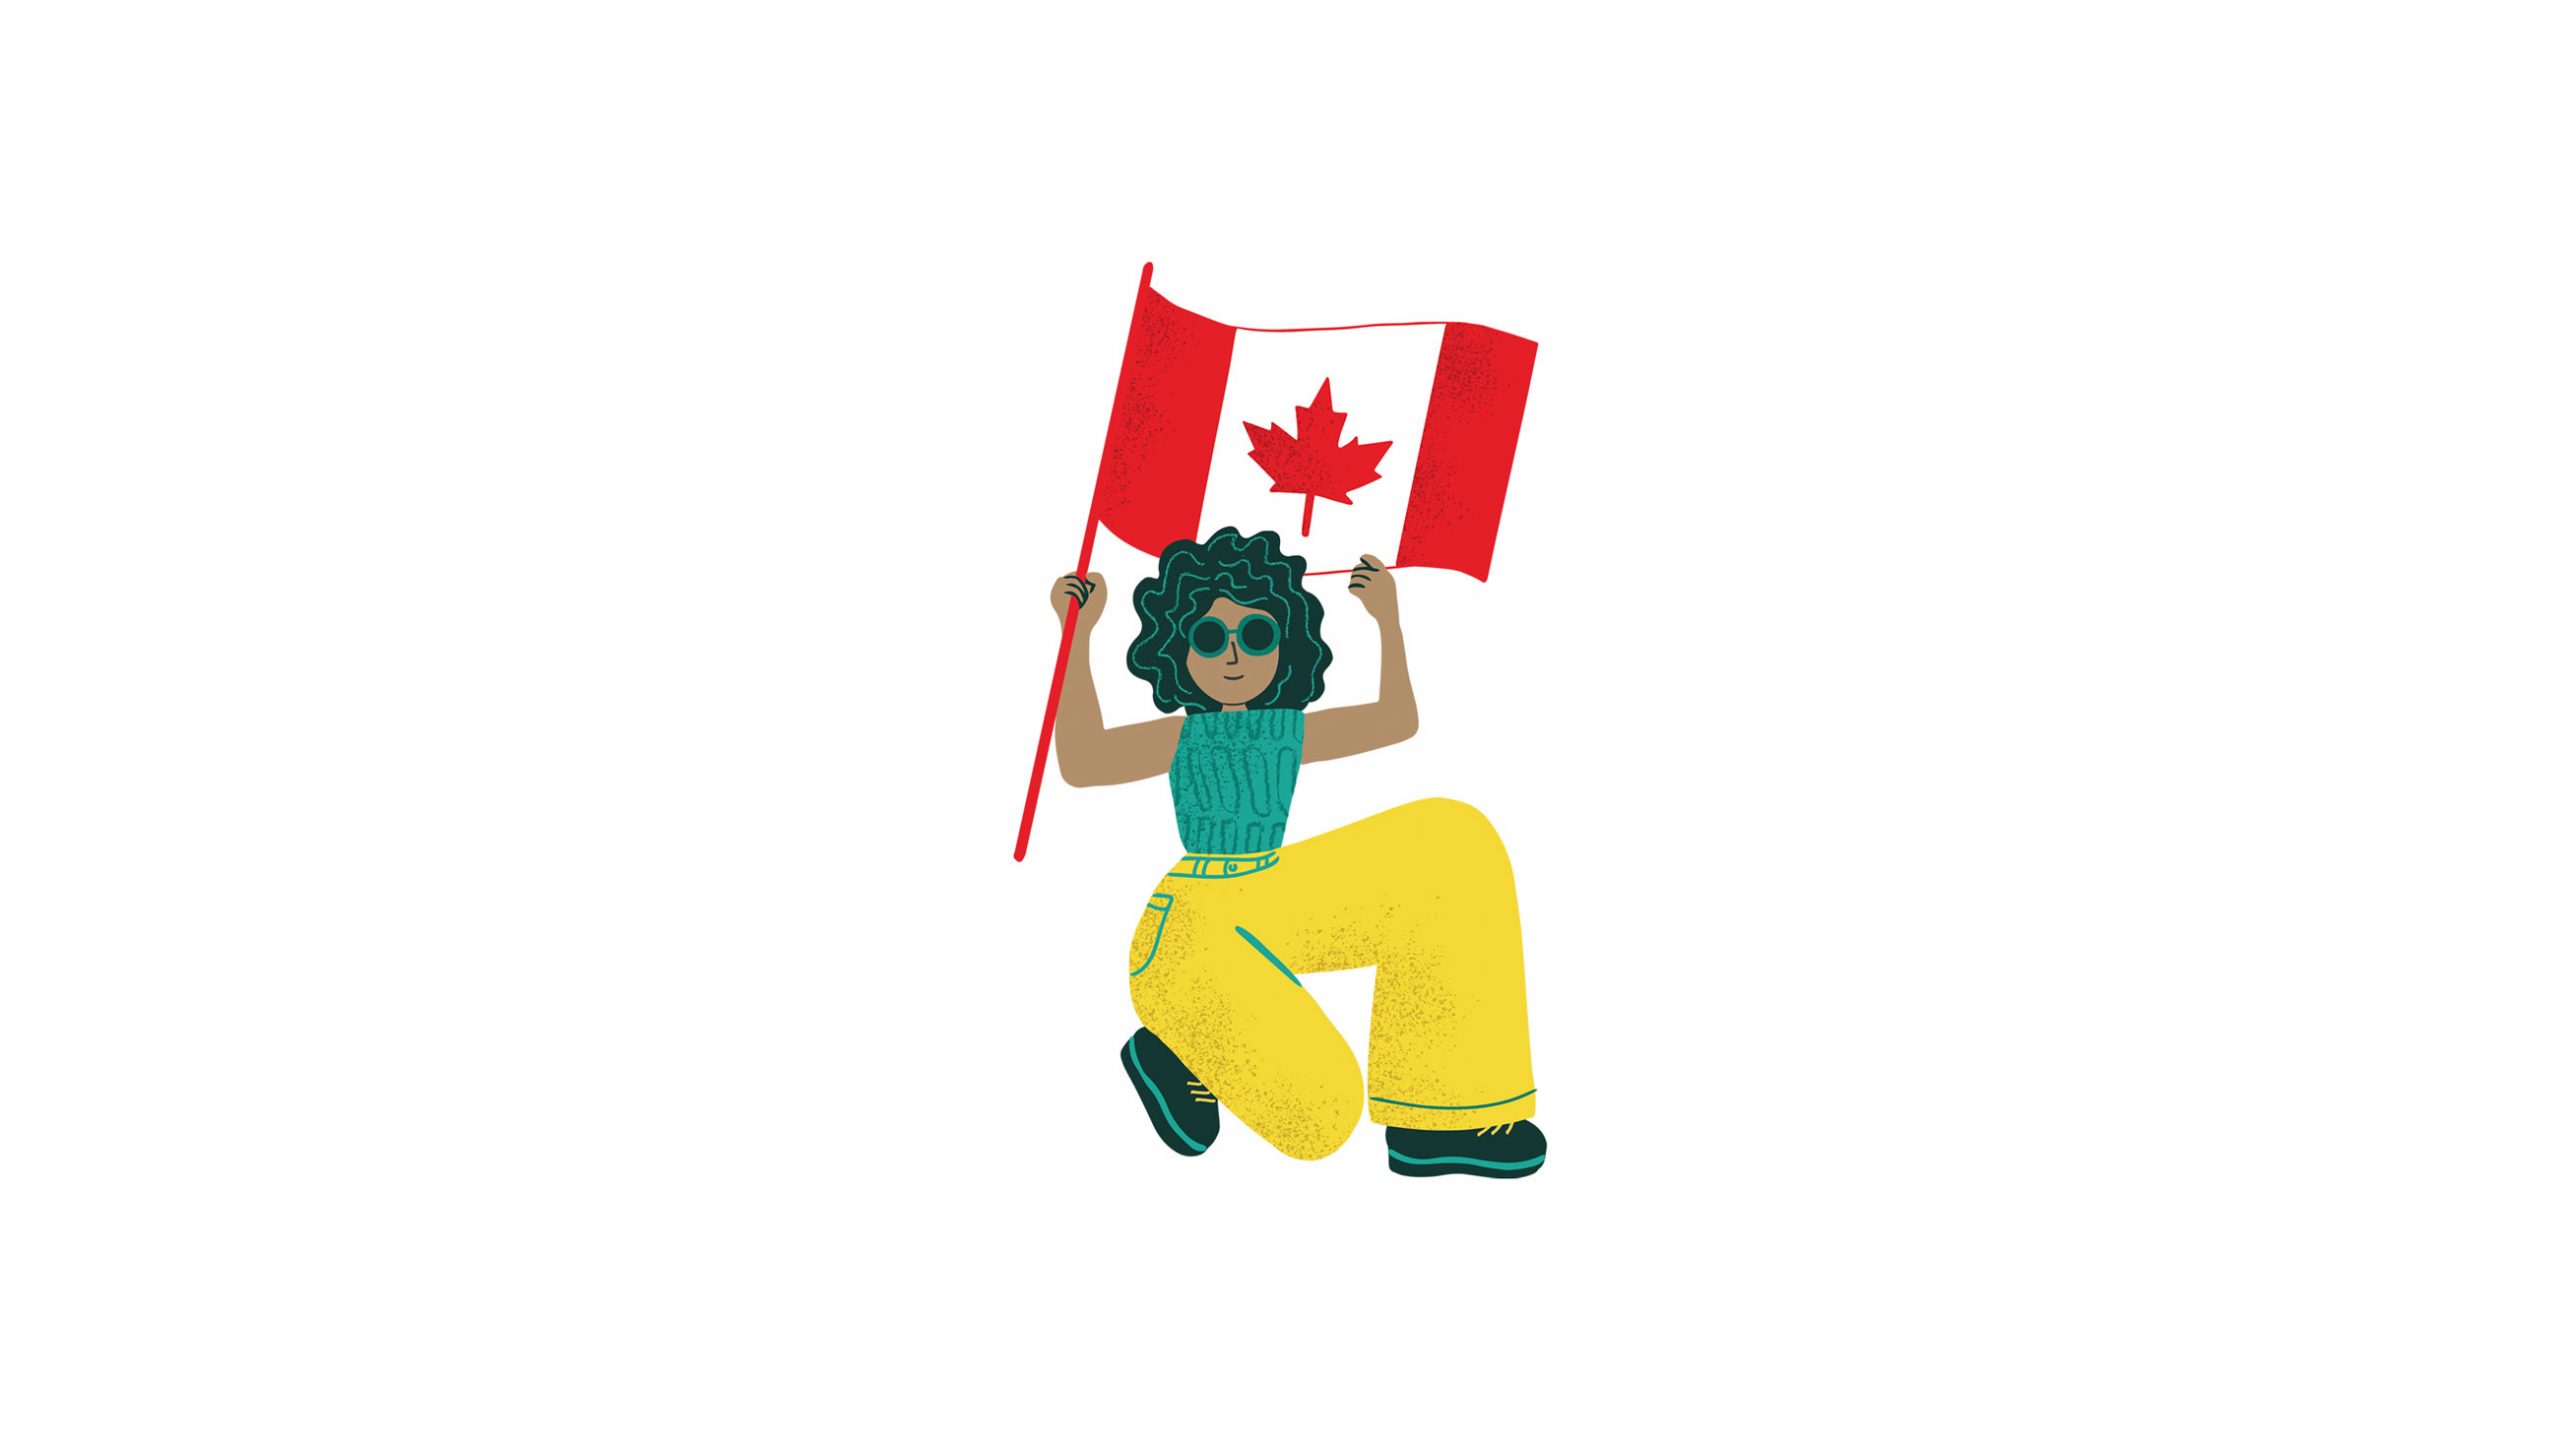 Illustrated person holding Canada flag